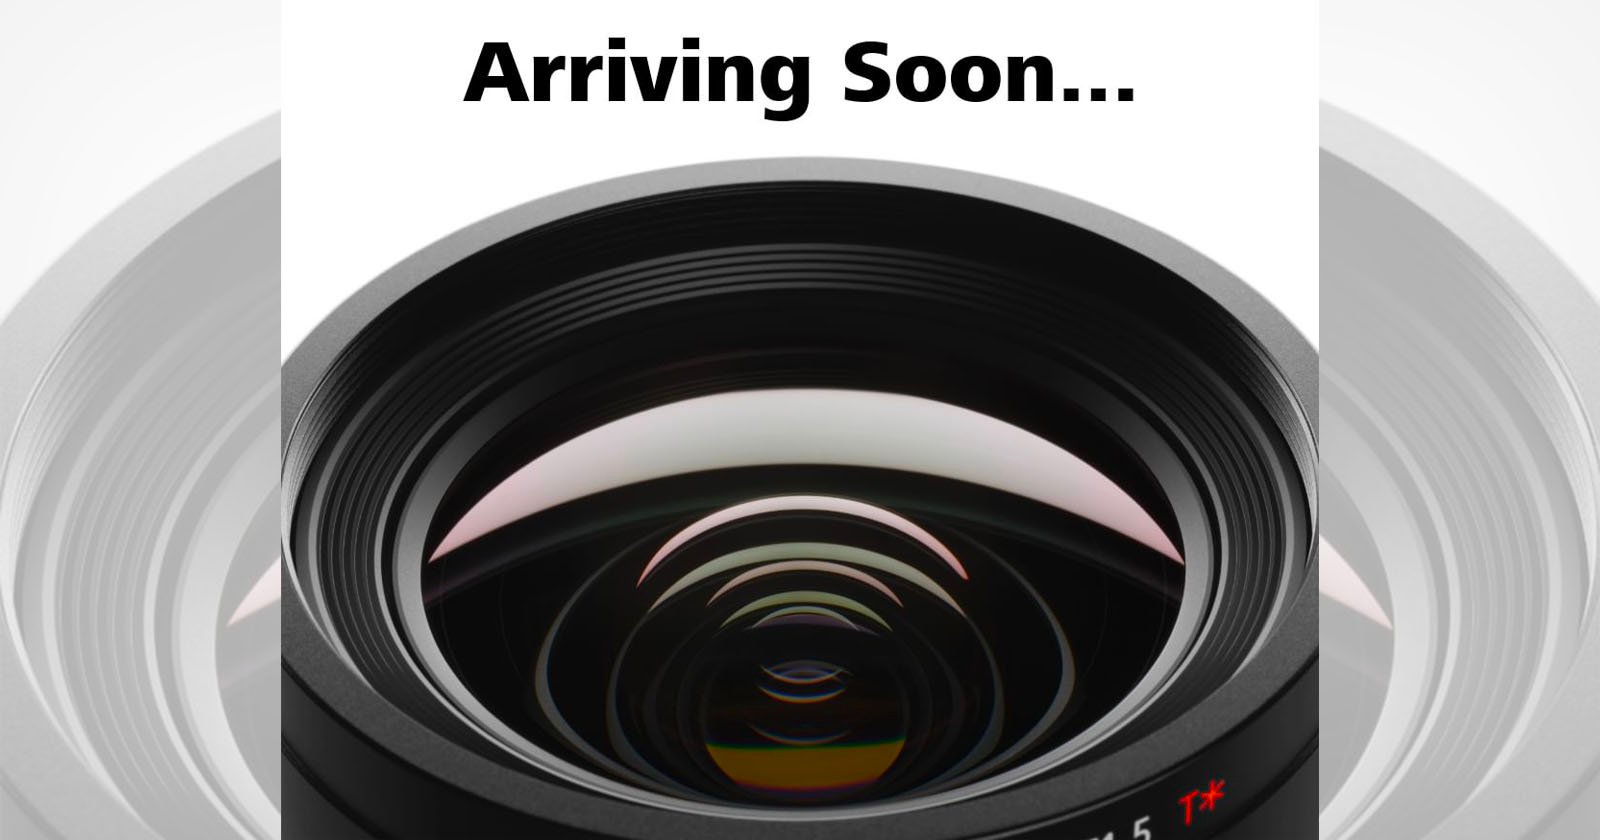 Zeiss Teases a New Lens: Arriving Soon and Approaching Fast